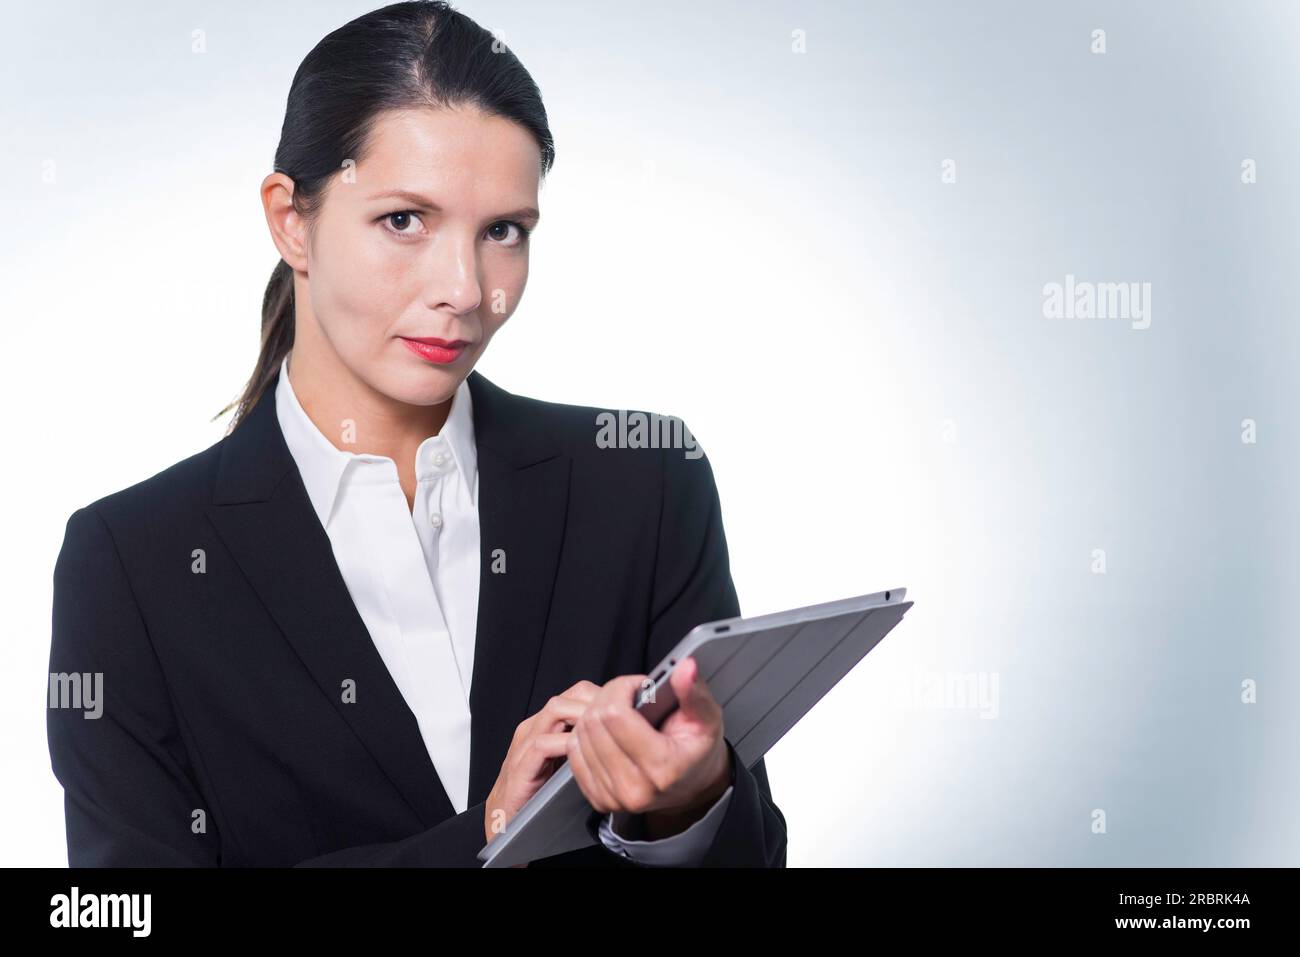 Confident business manageress working on a tablet computer as she stands looking at the camera with a serious thoughtful expression, studio portrait Stock Photo